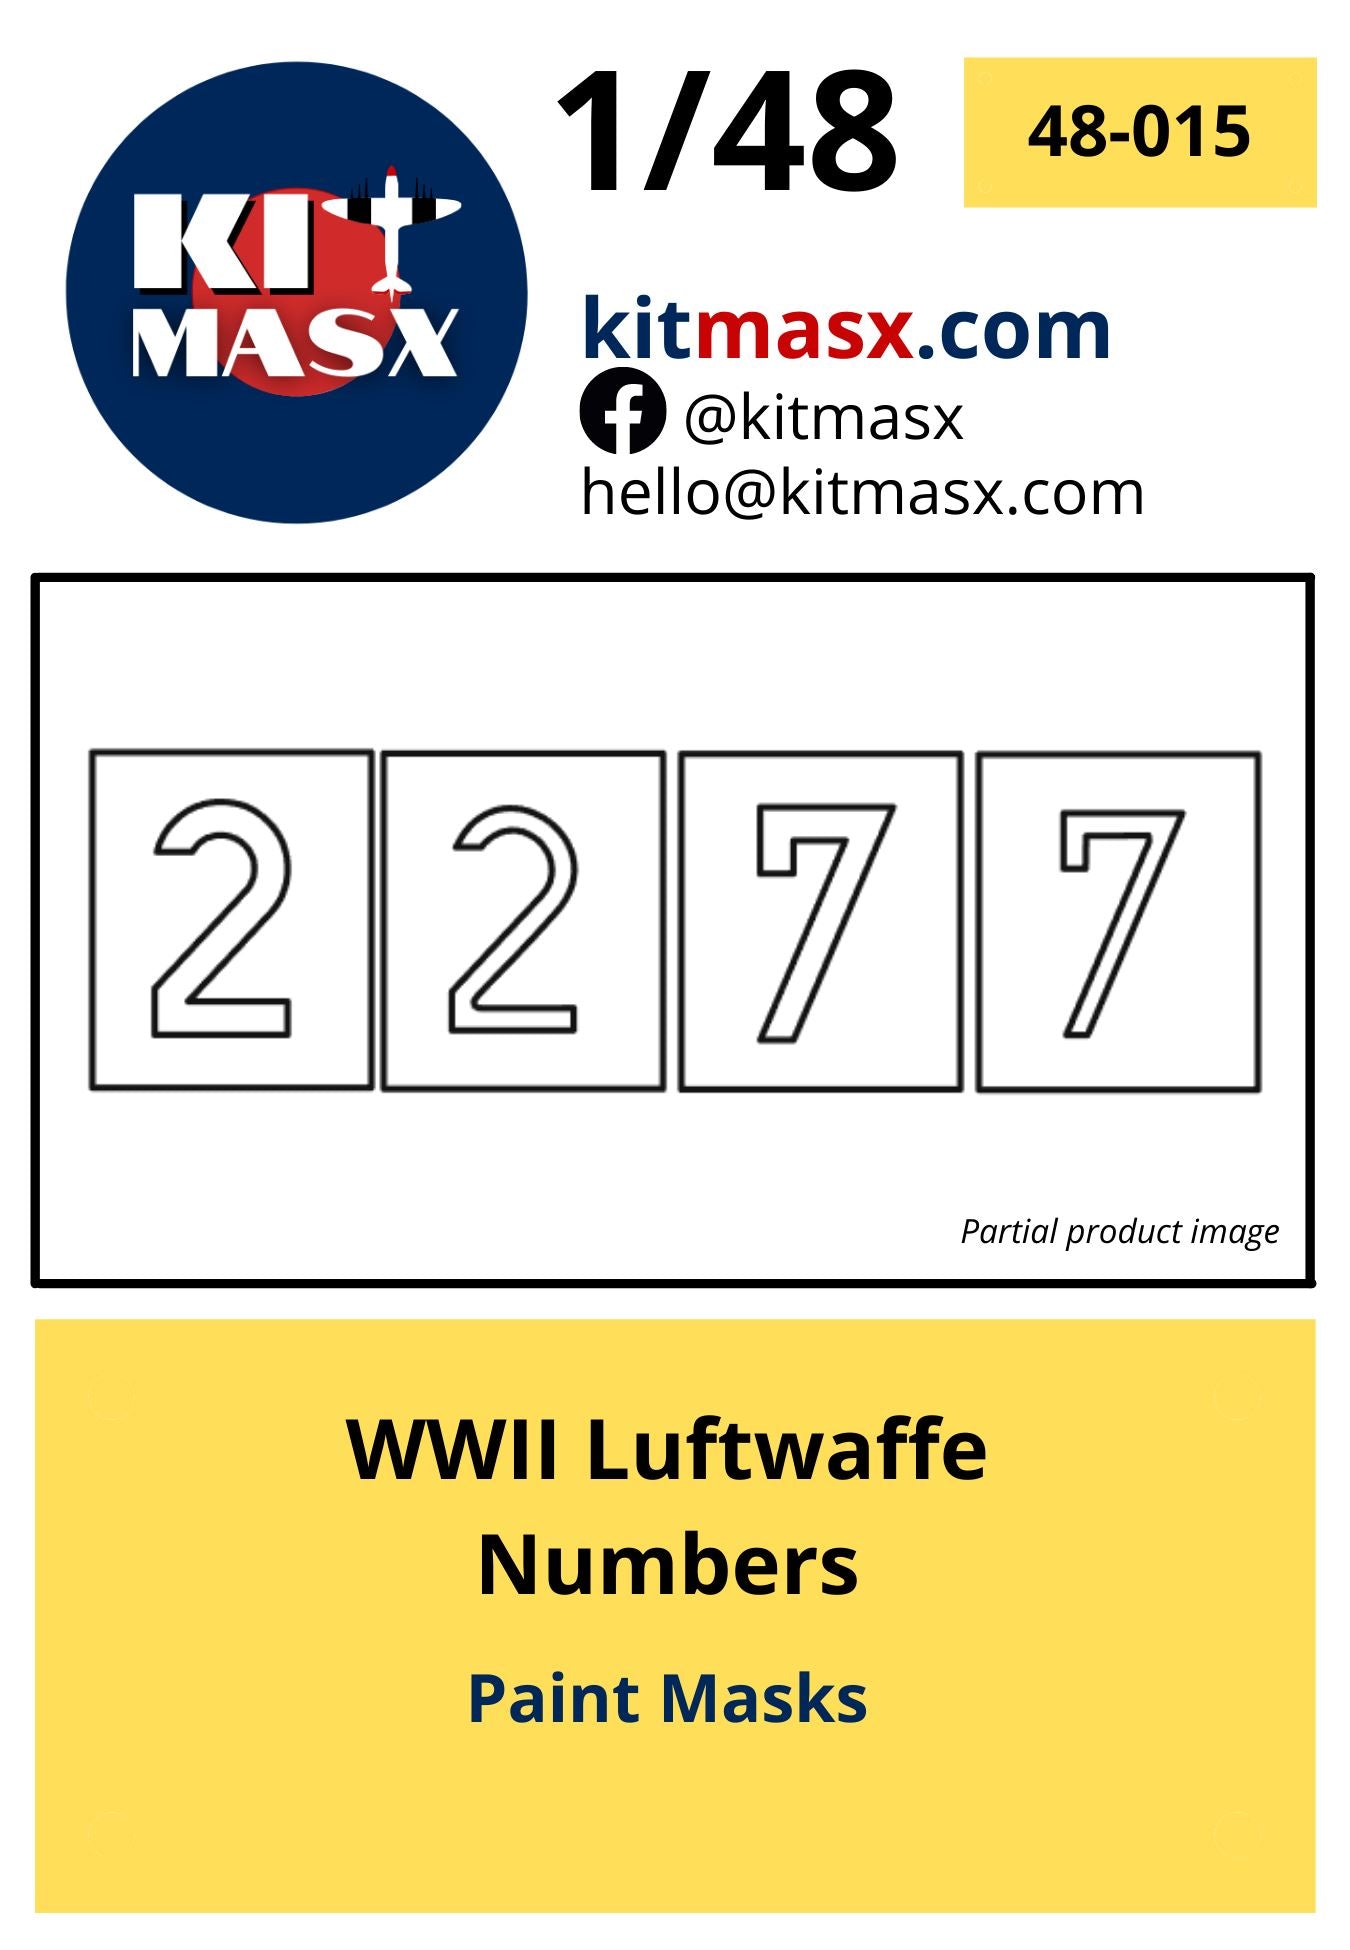 WWII Luftwaffe Numbers Scale Model Accessories Kit Masx 